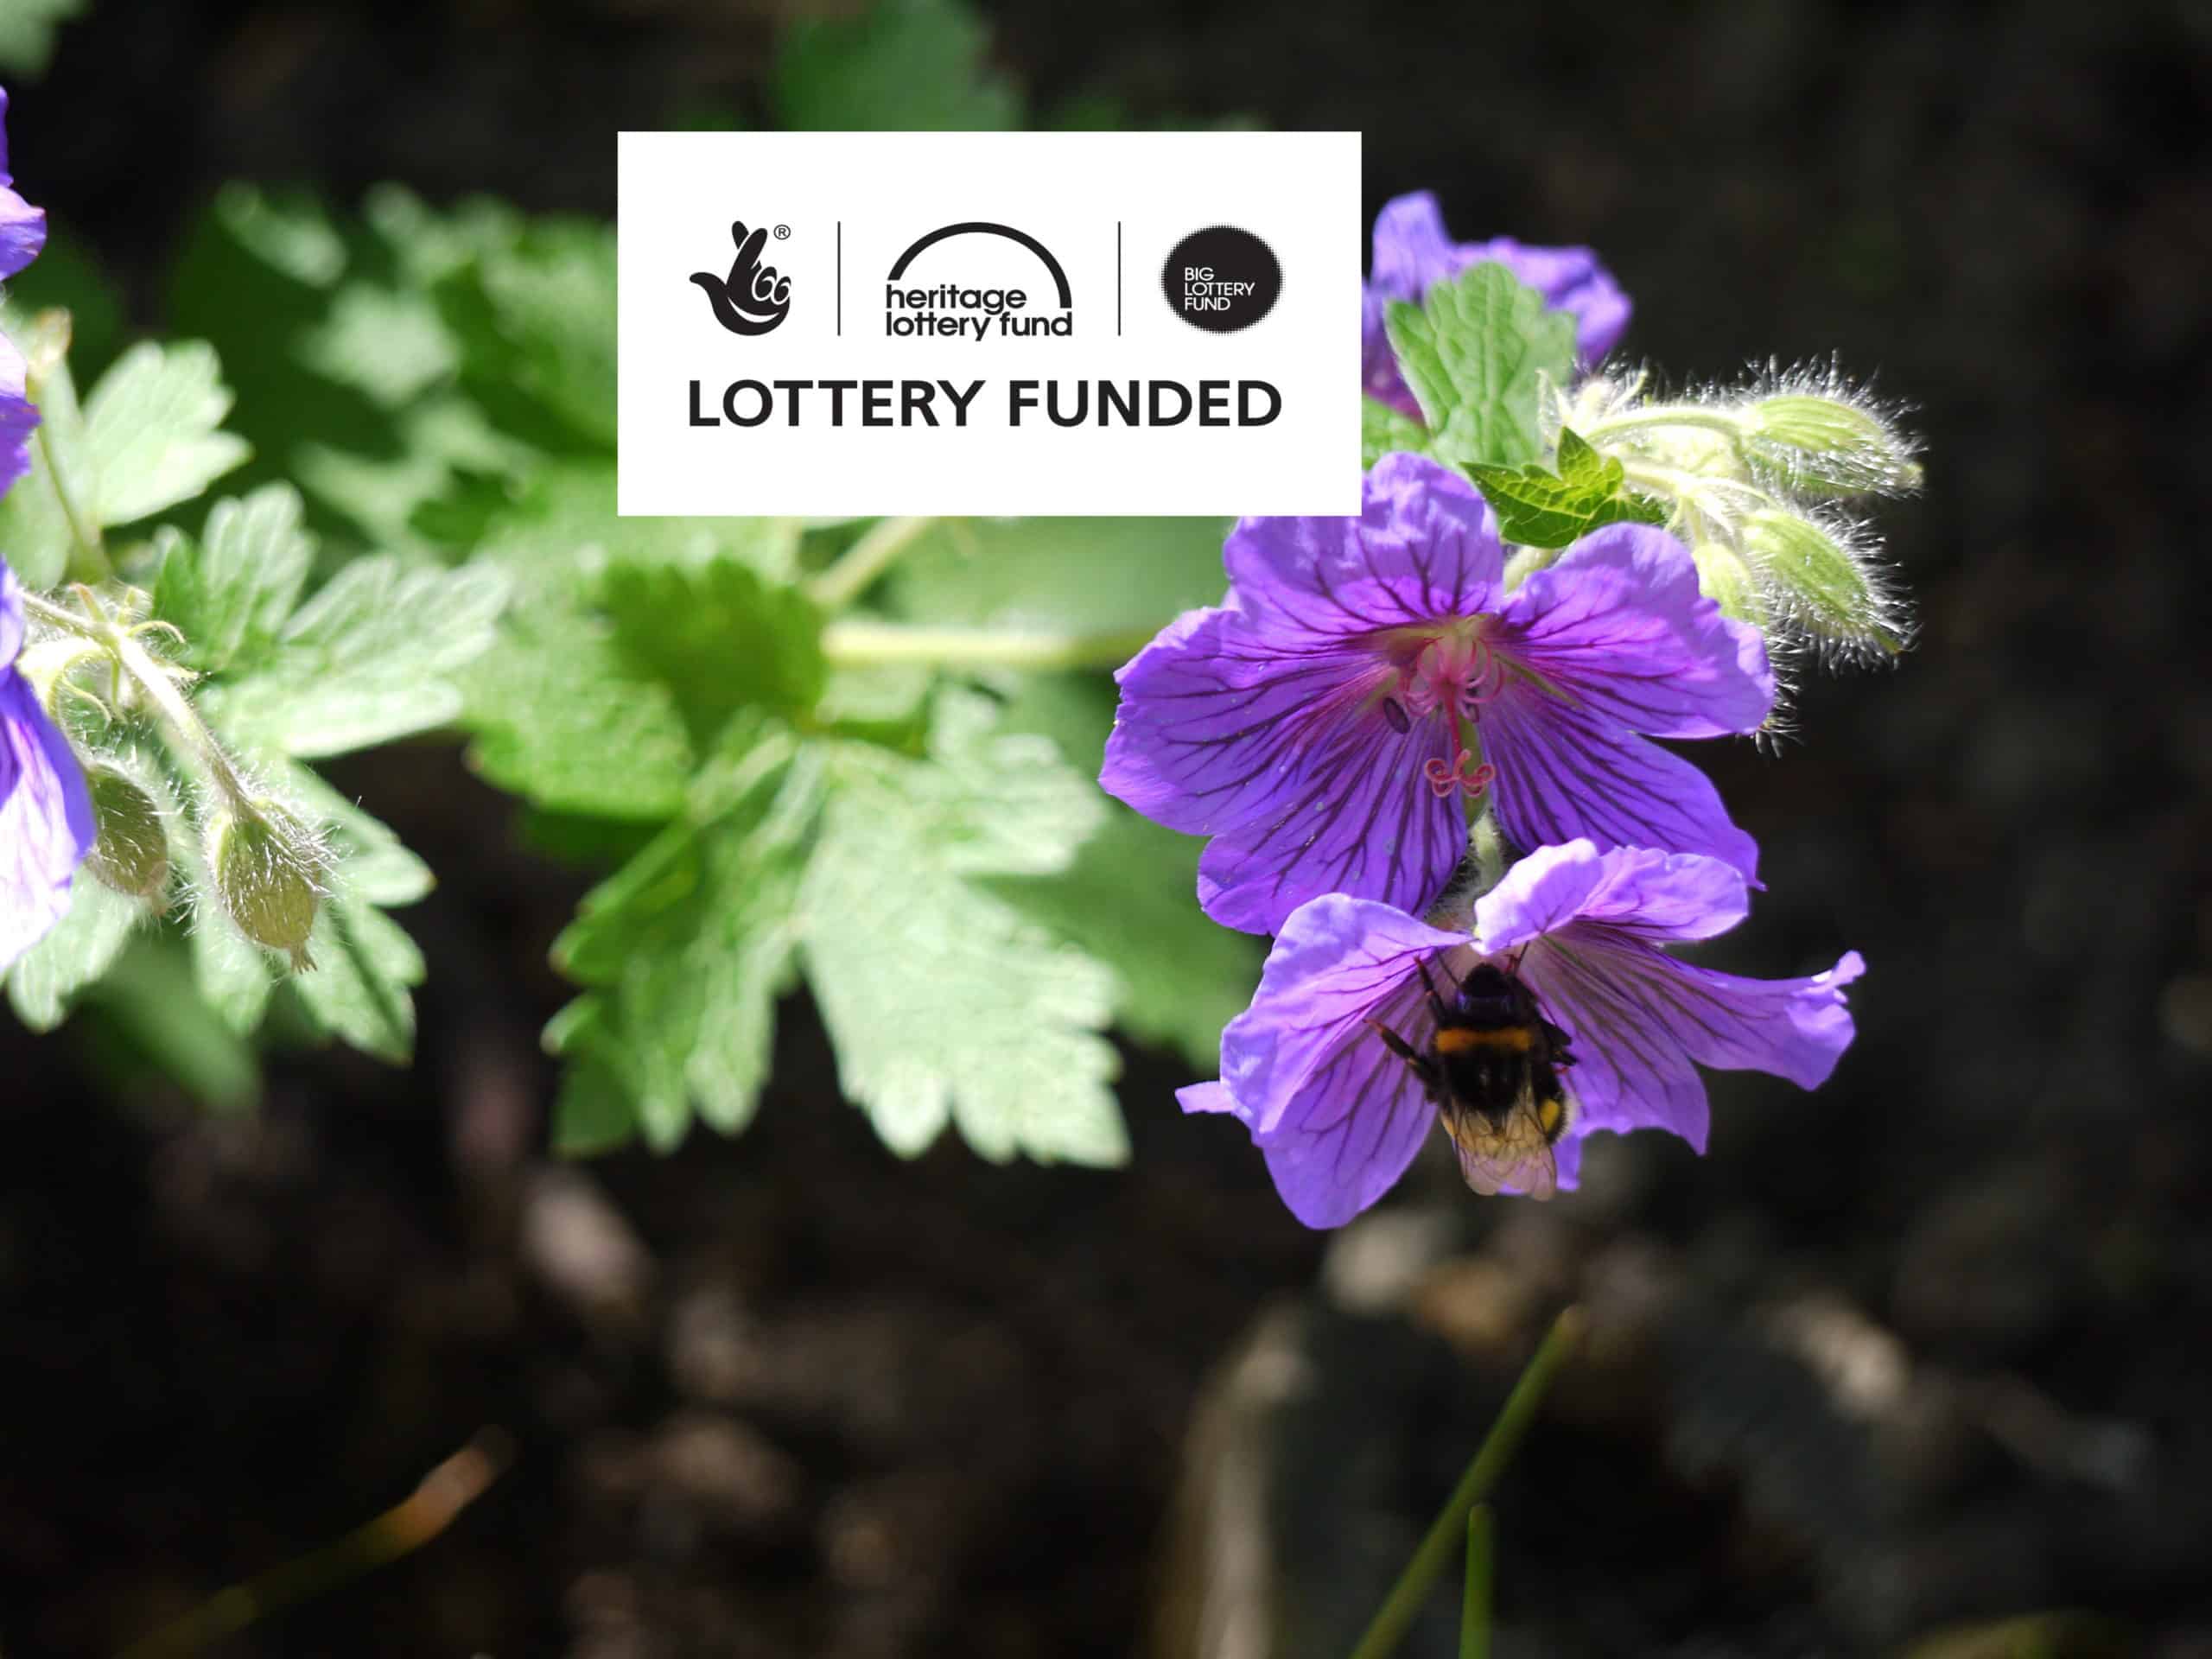 A bee collecting nectar from a purple flower with the heritage lottery fund logo in the corner, indicating lottery funding.